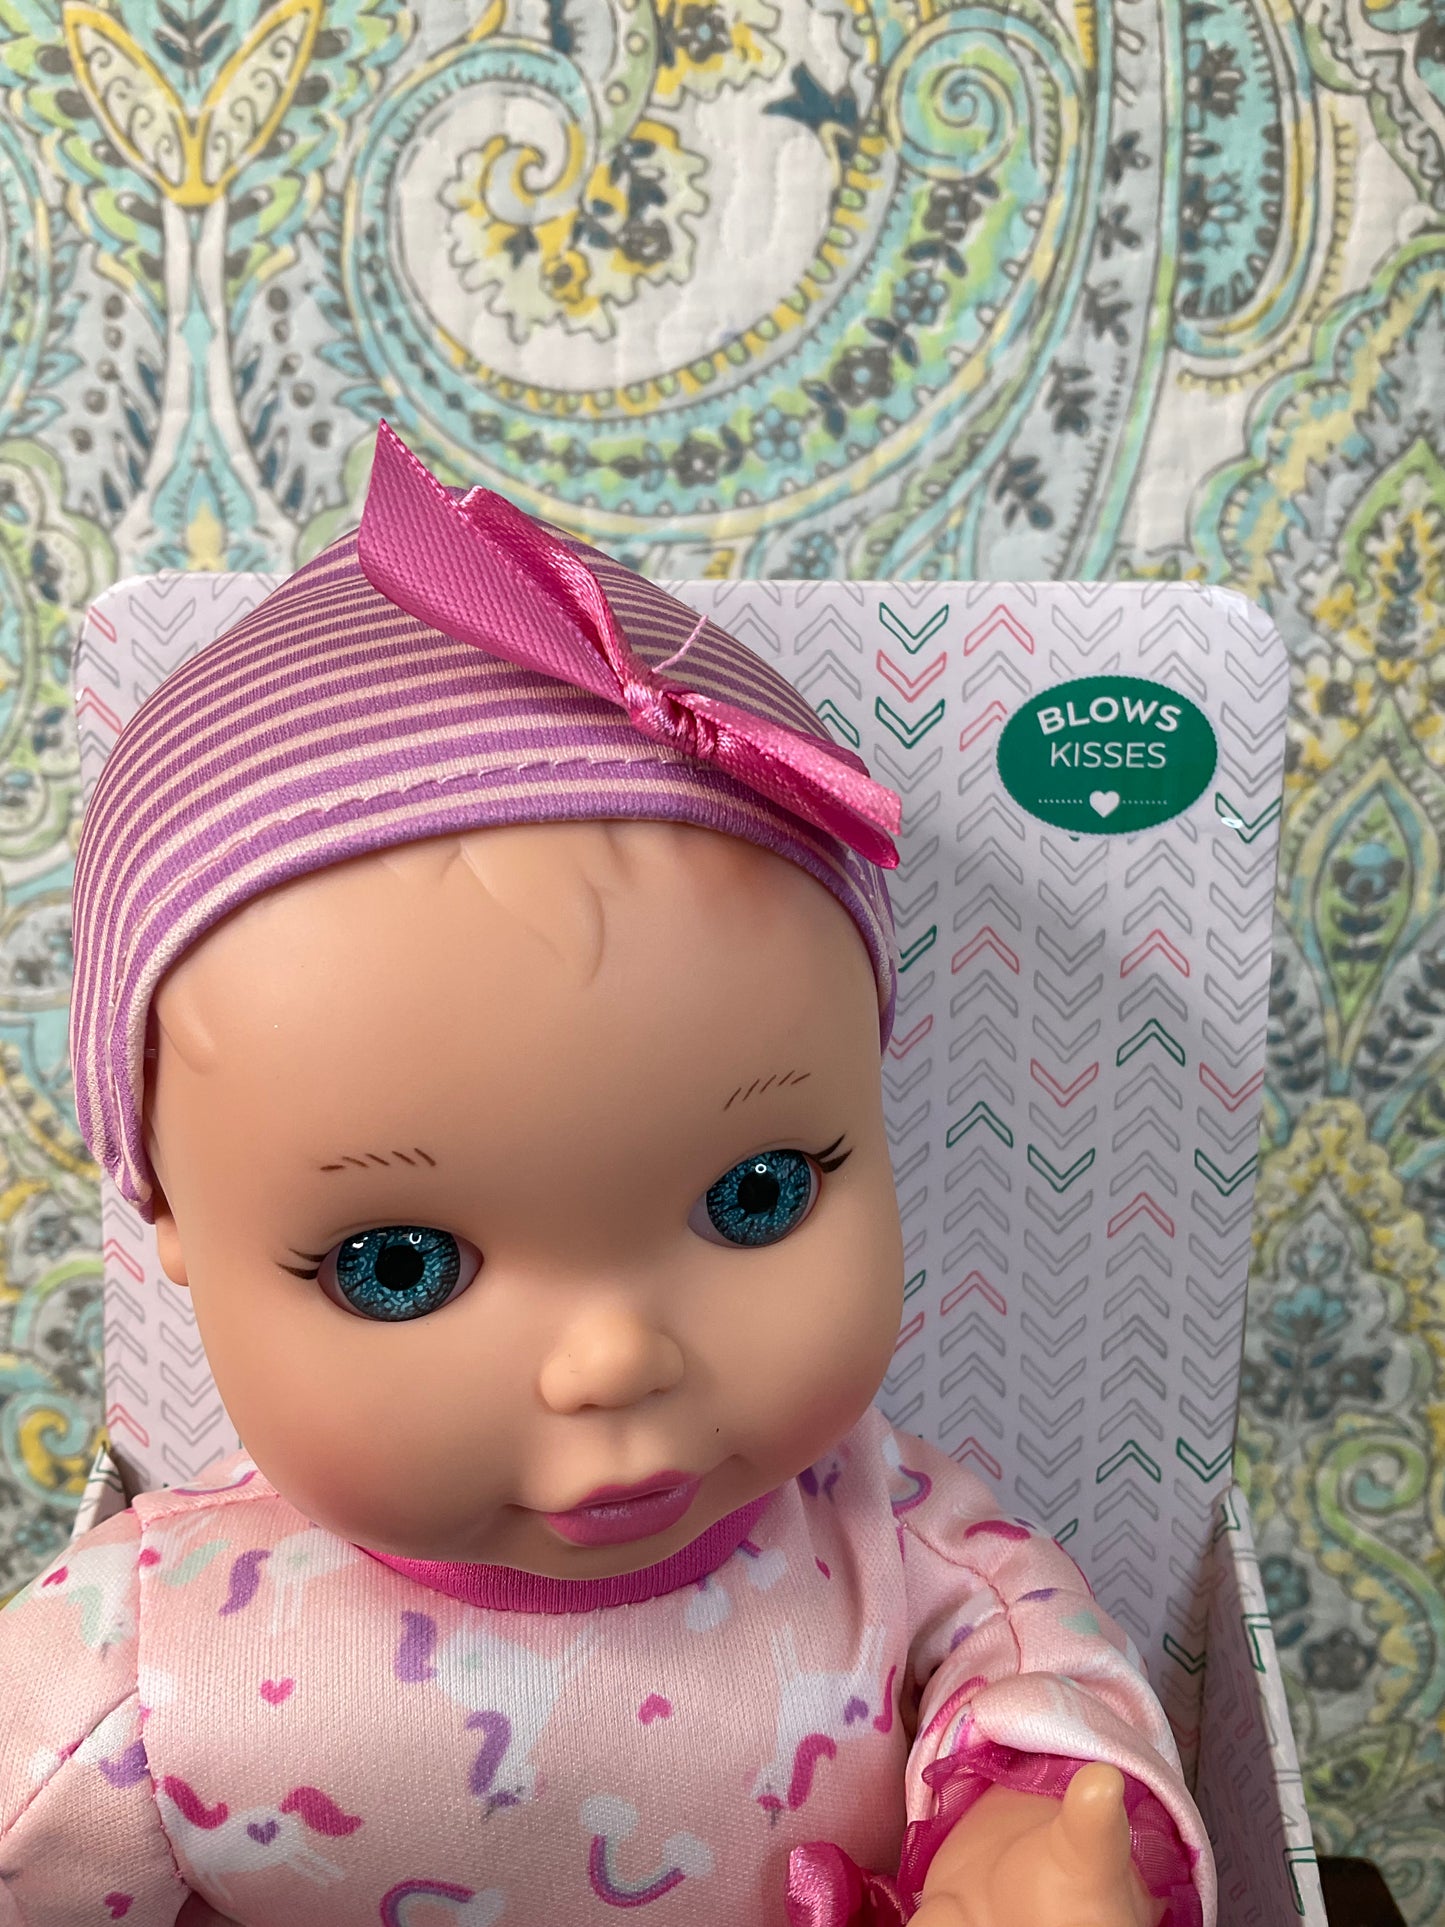 All Things Sweet Baby Kisses Dolls, Sold Separately